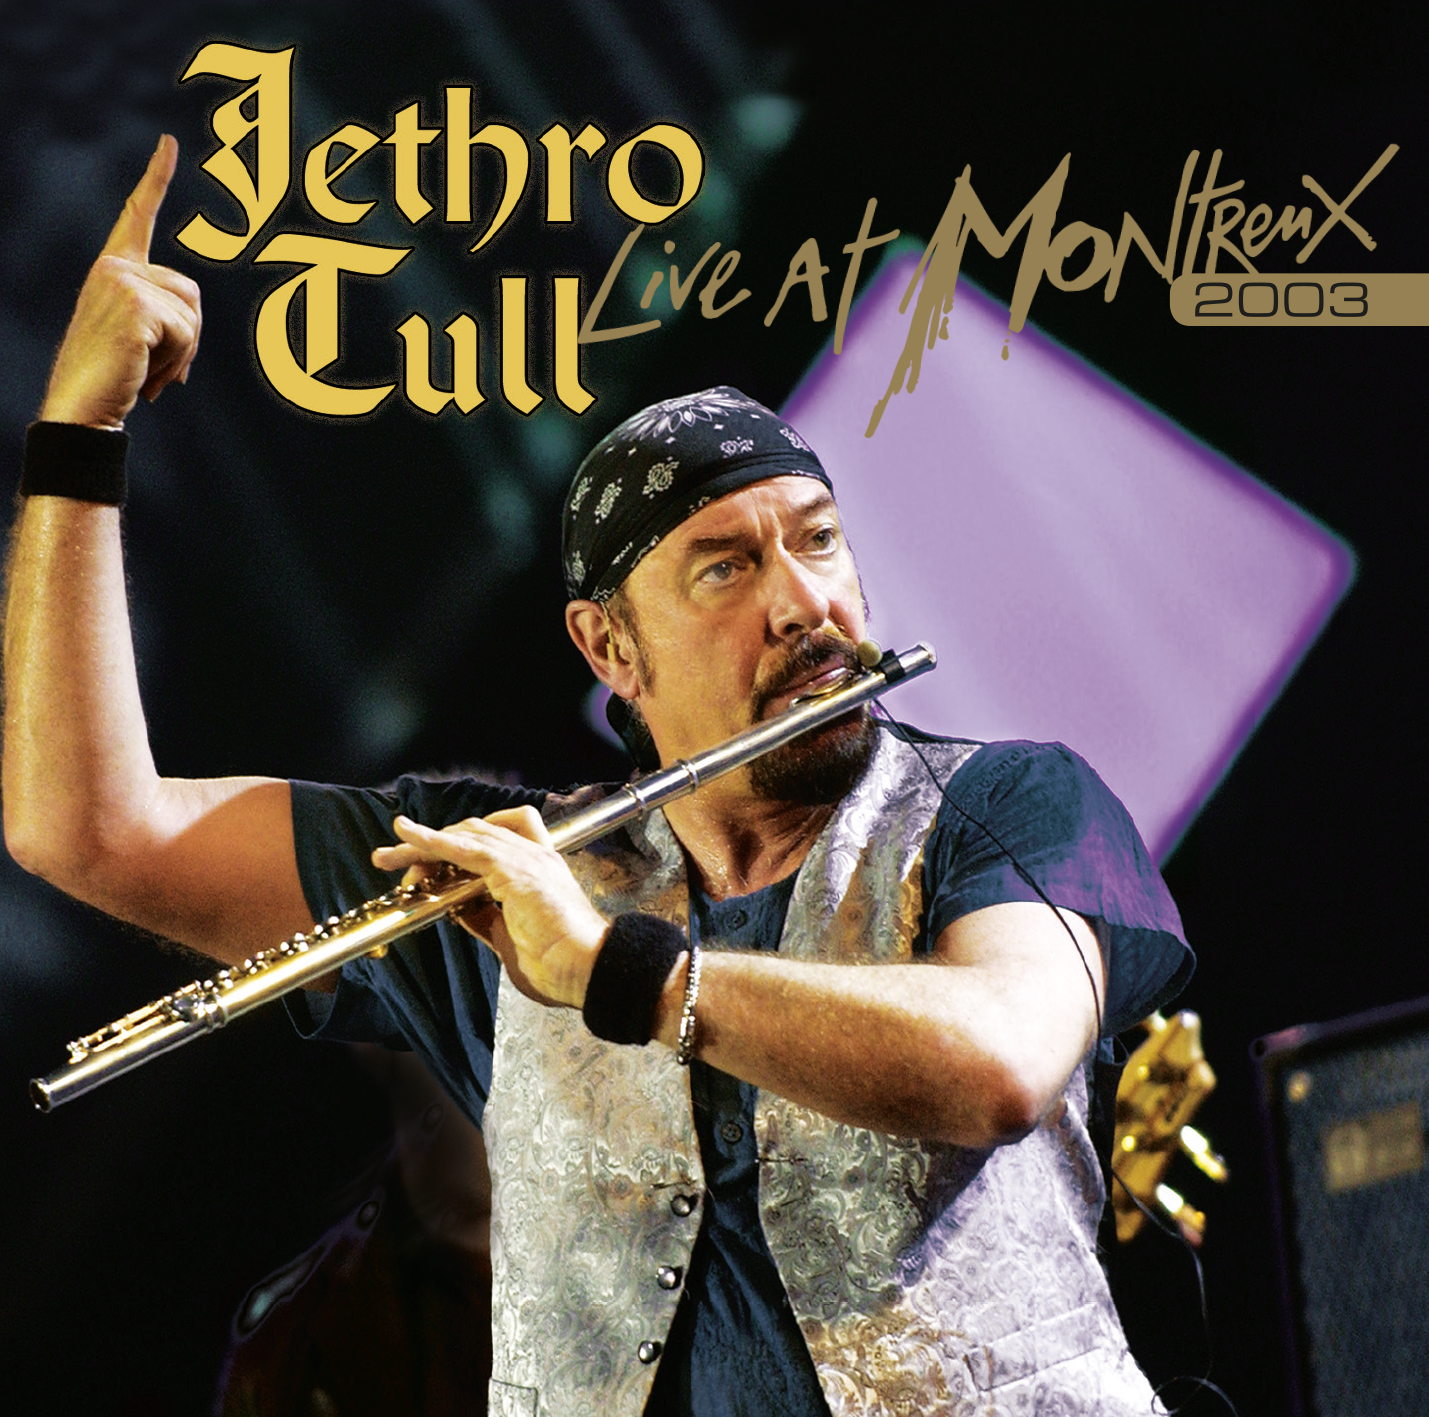 Jethro Tull - Live At Montreux 2003 - 2xCD+DVD